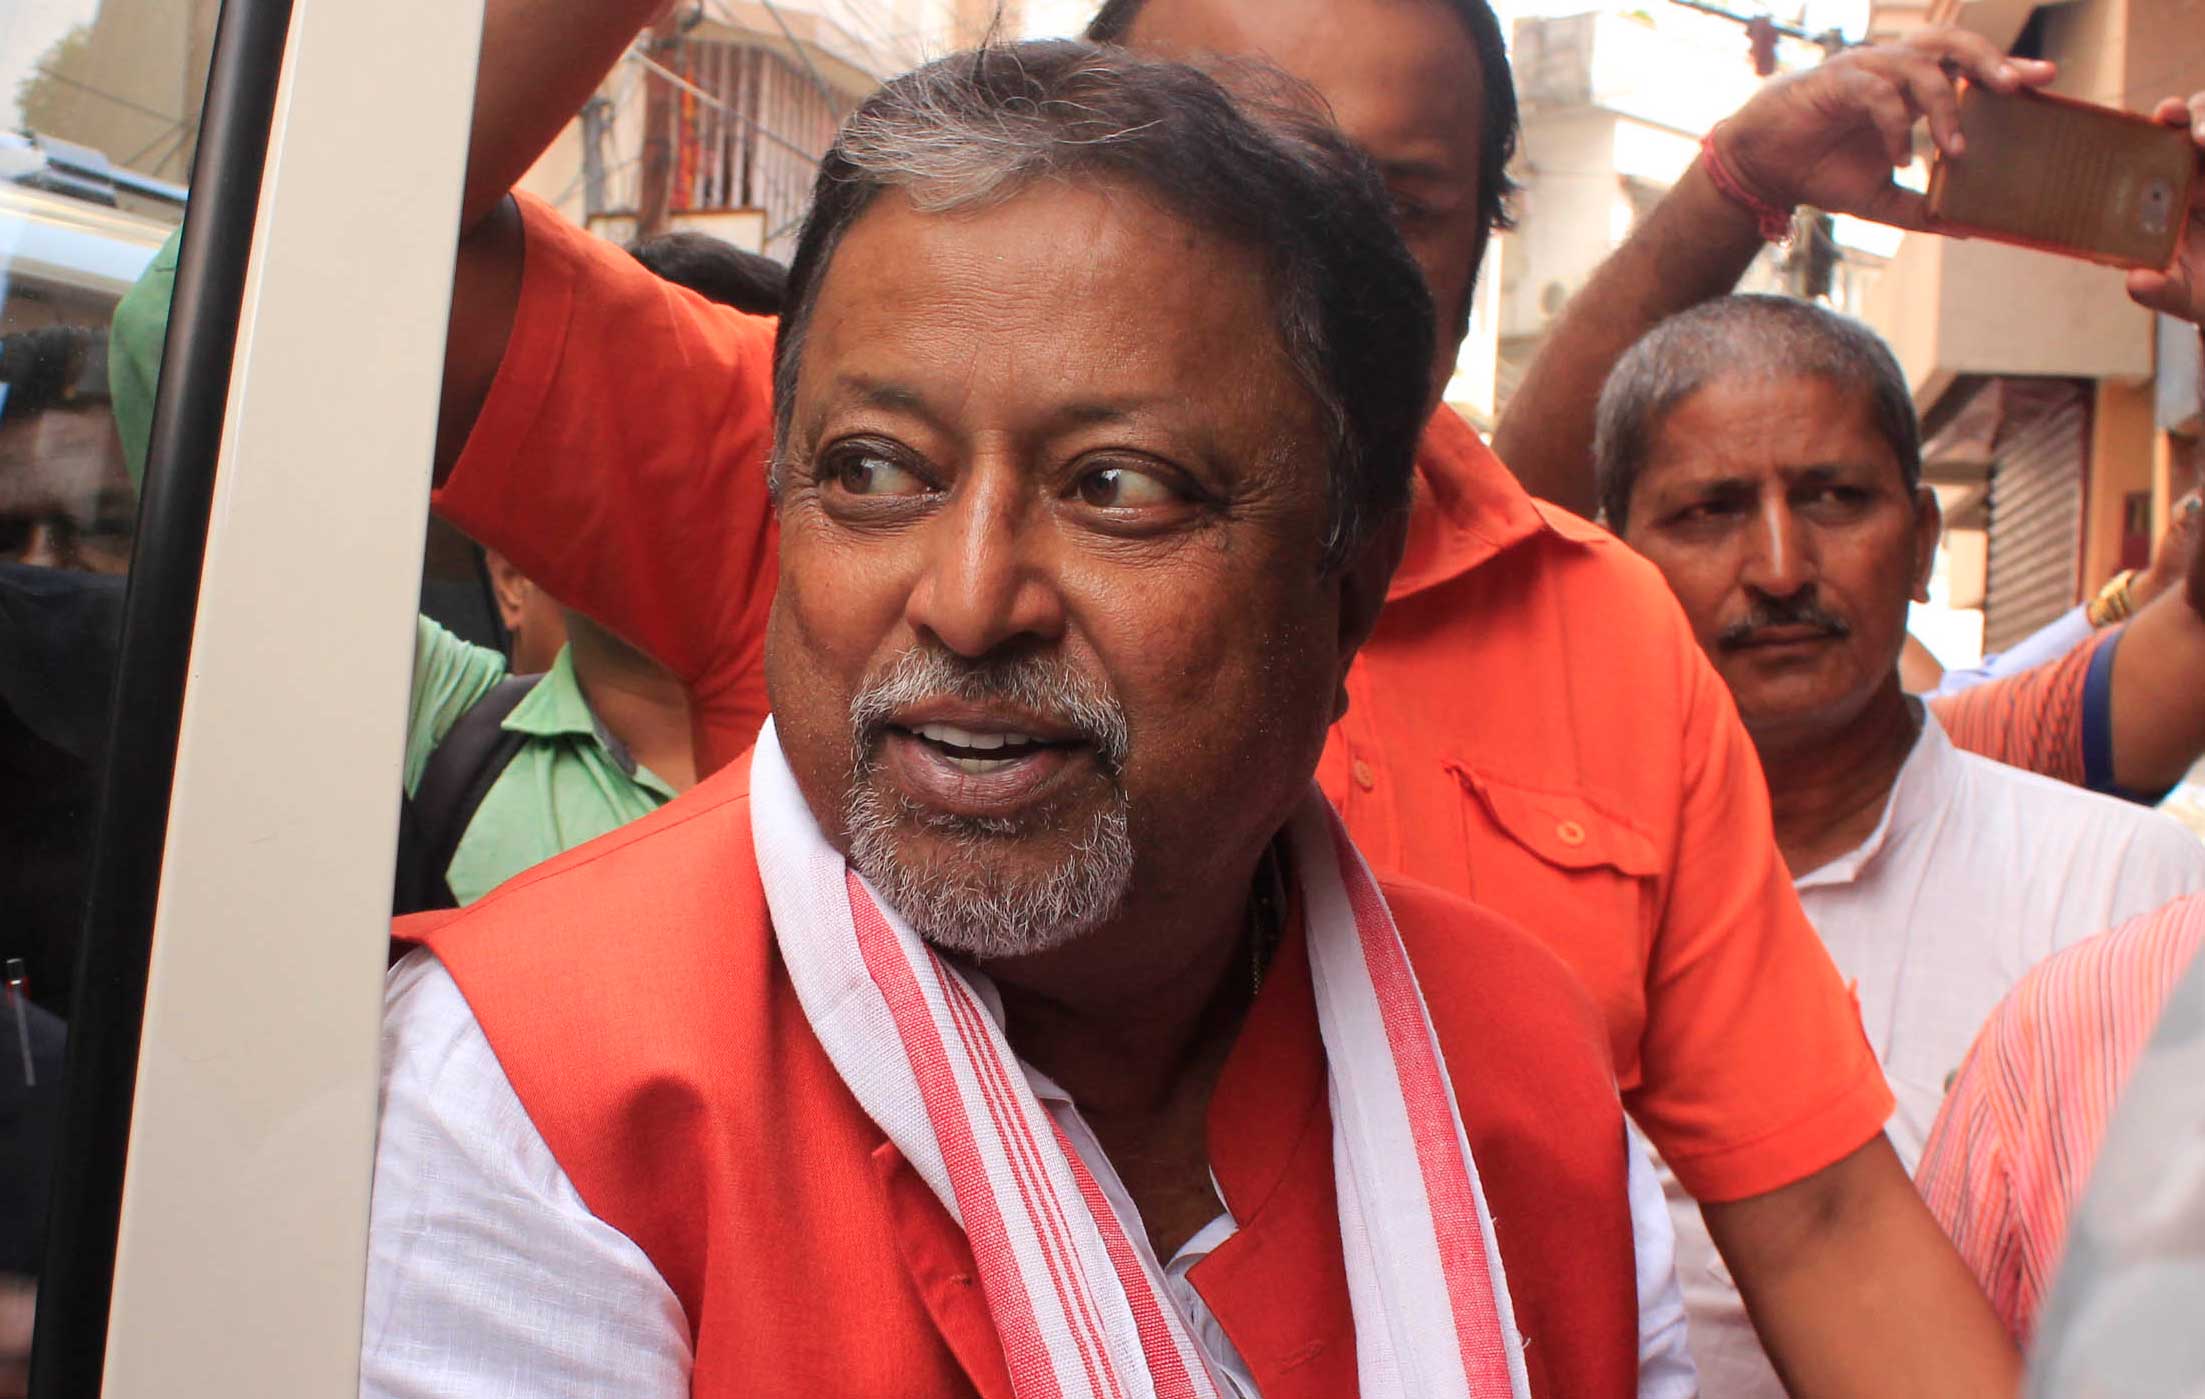 BJP leader Mukul Roy sought to scoff at the Brigade rally’s call to save democracy.